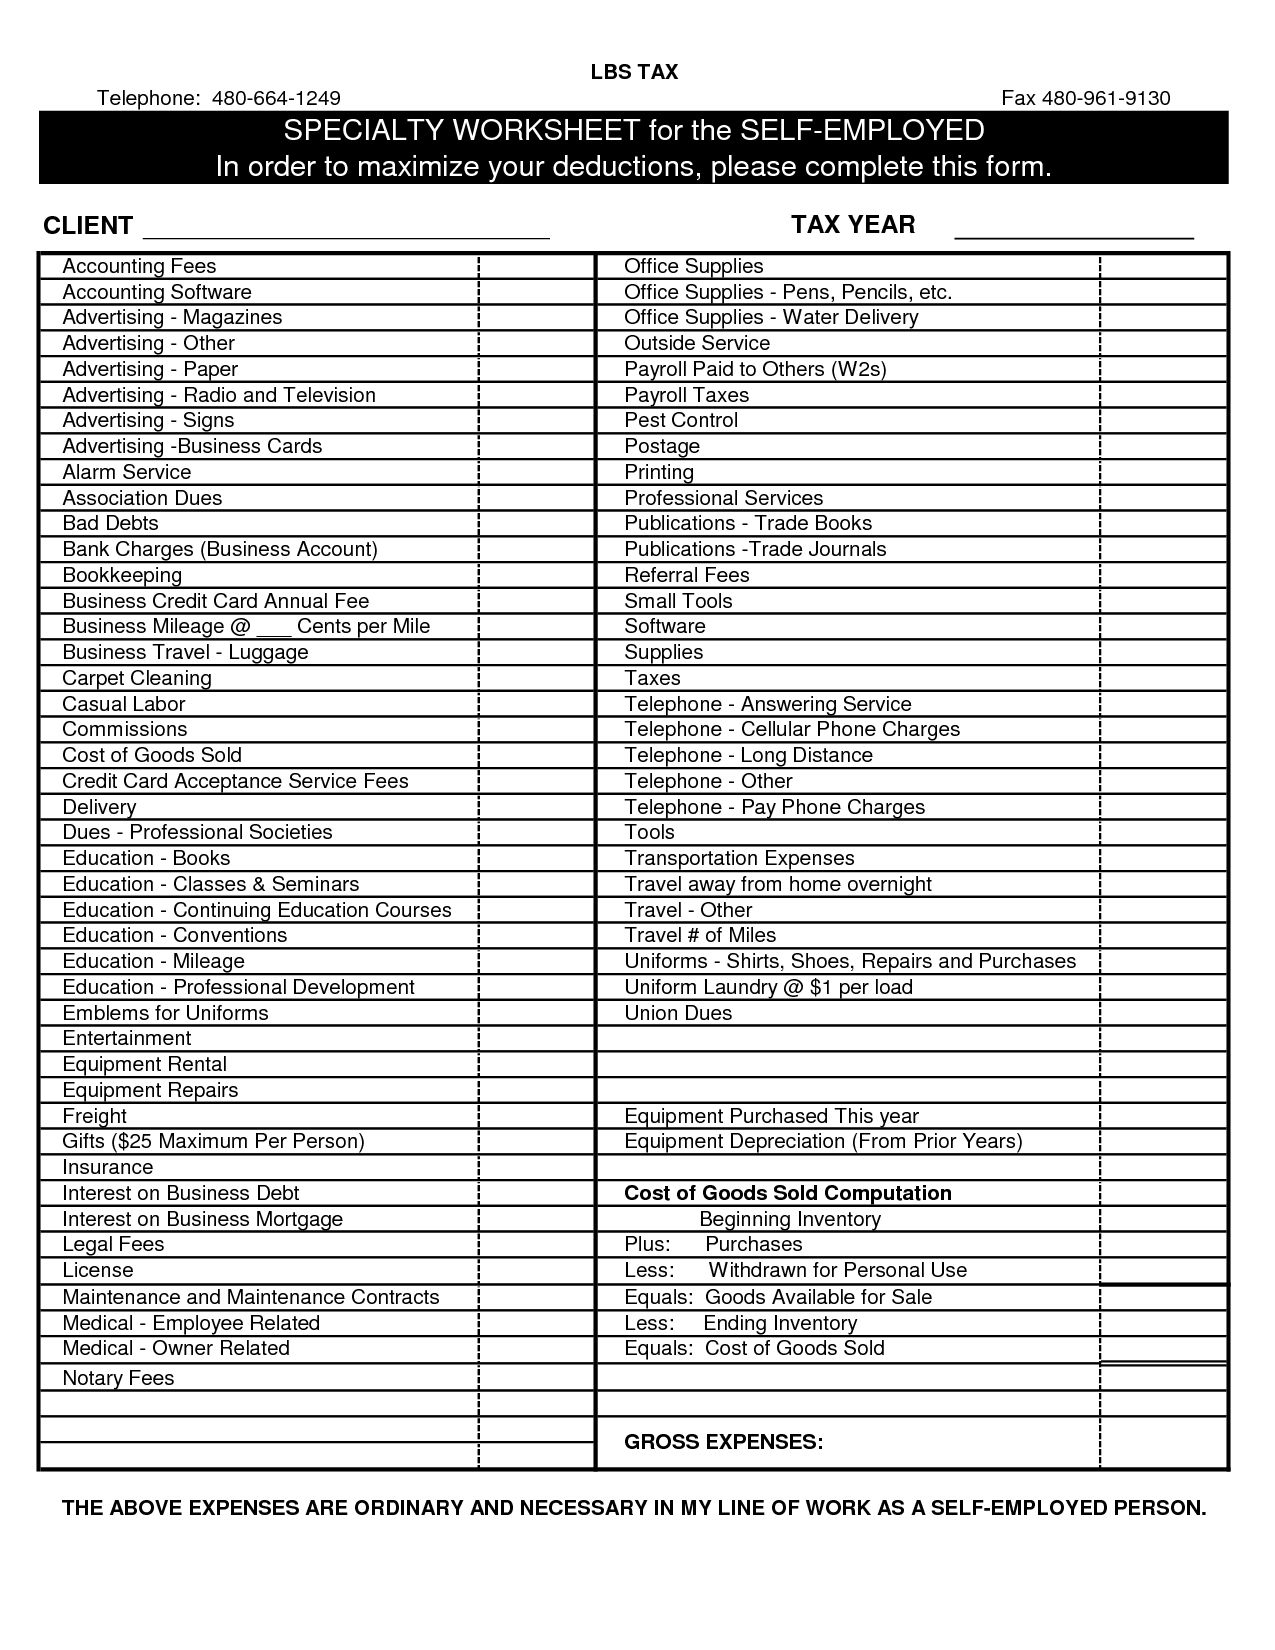 2016-self-employment-tax-and-deduction-worksheet-db-excel